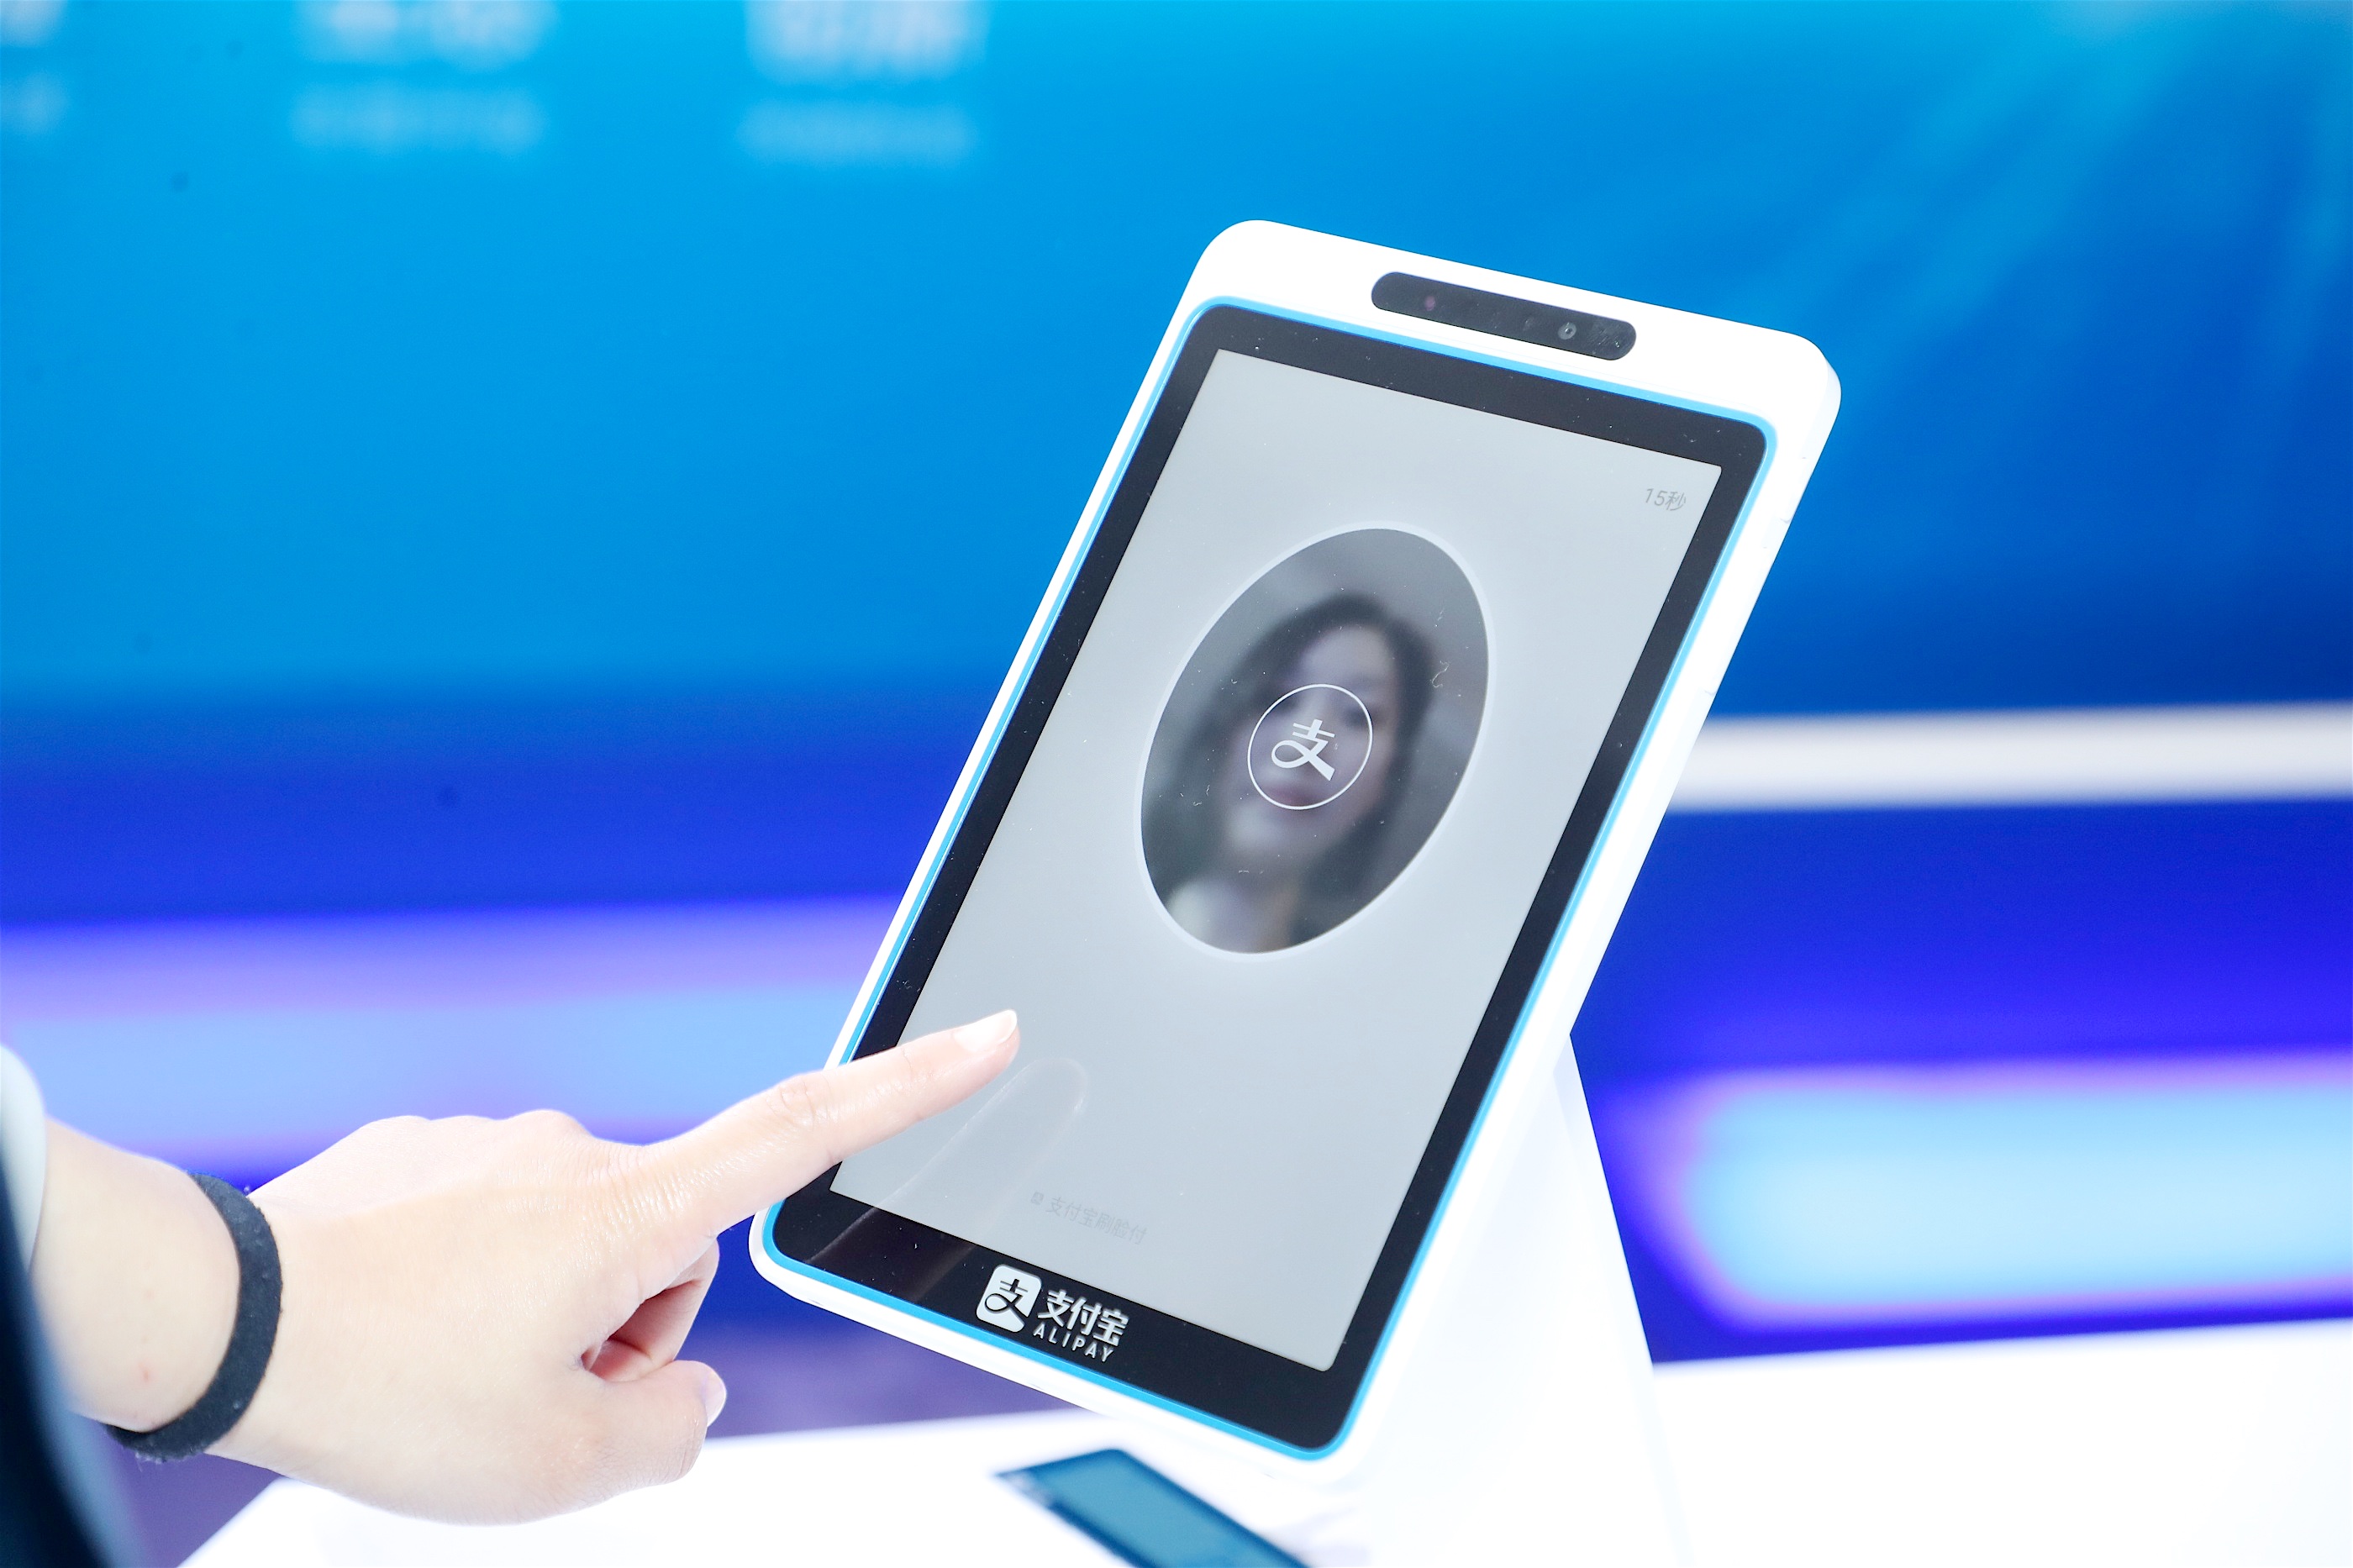 China’s top fintech adviser sees ‘bright prospects’ for facial recognition payment systems